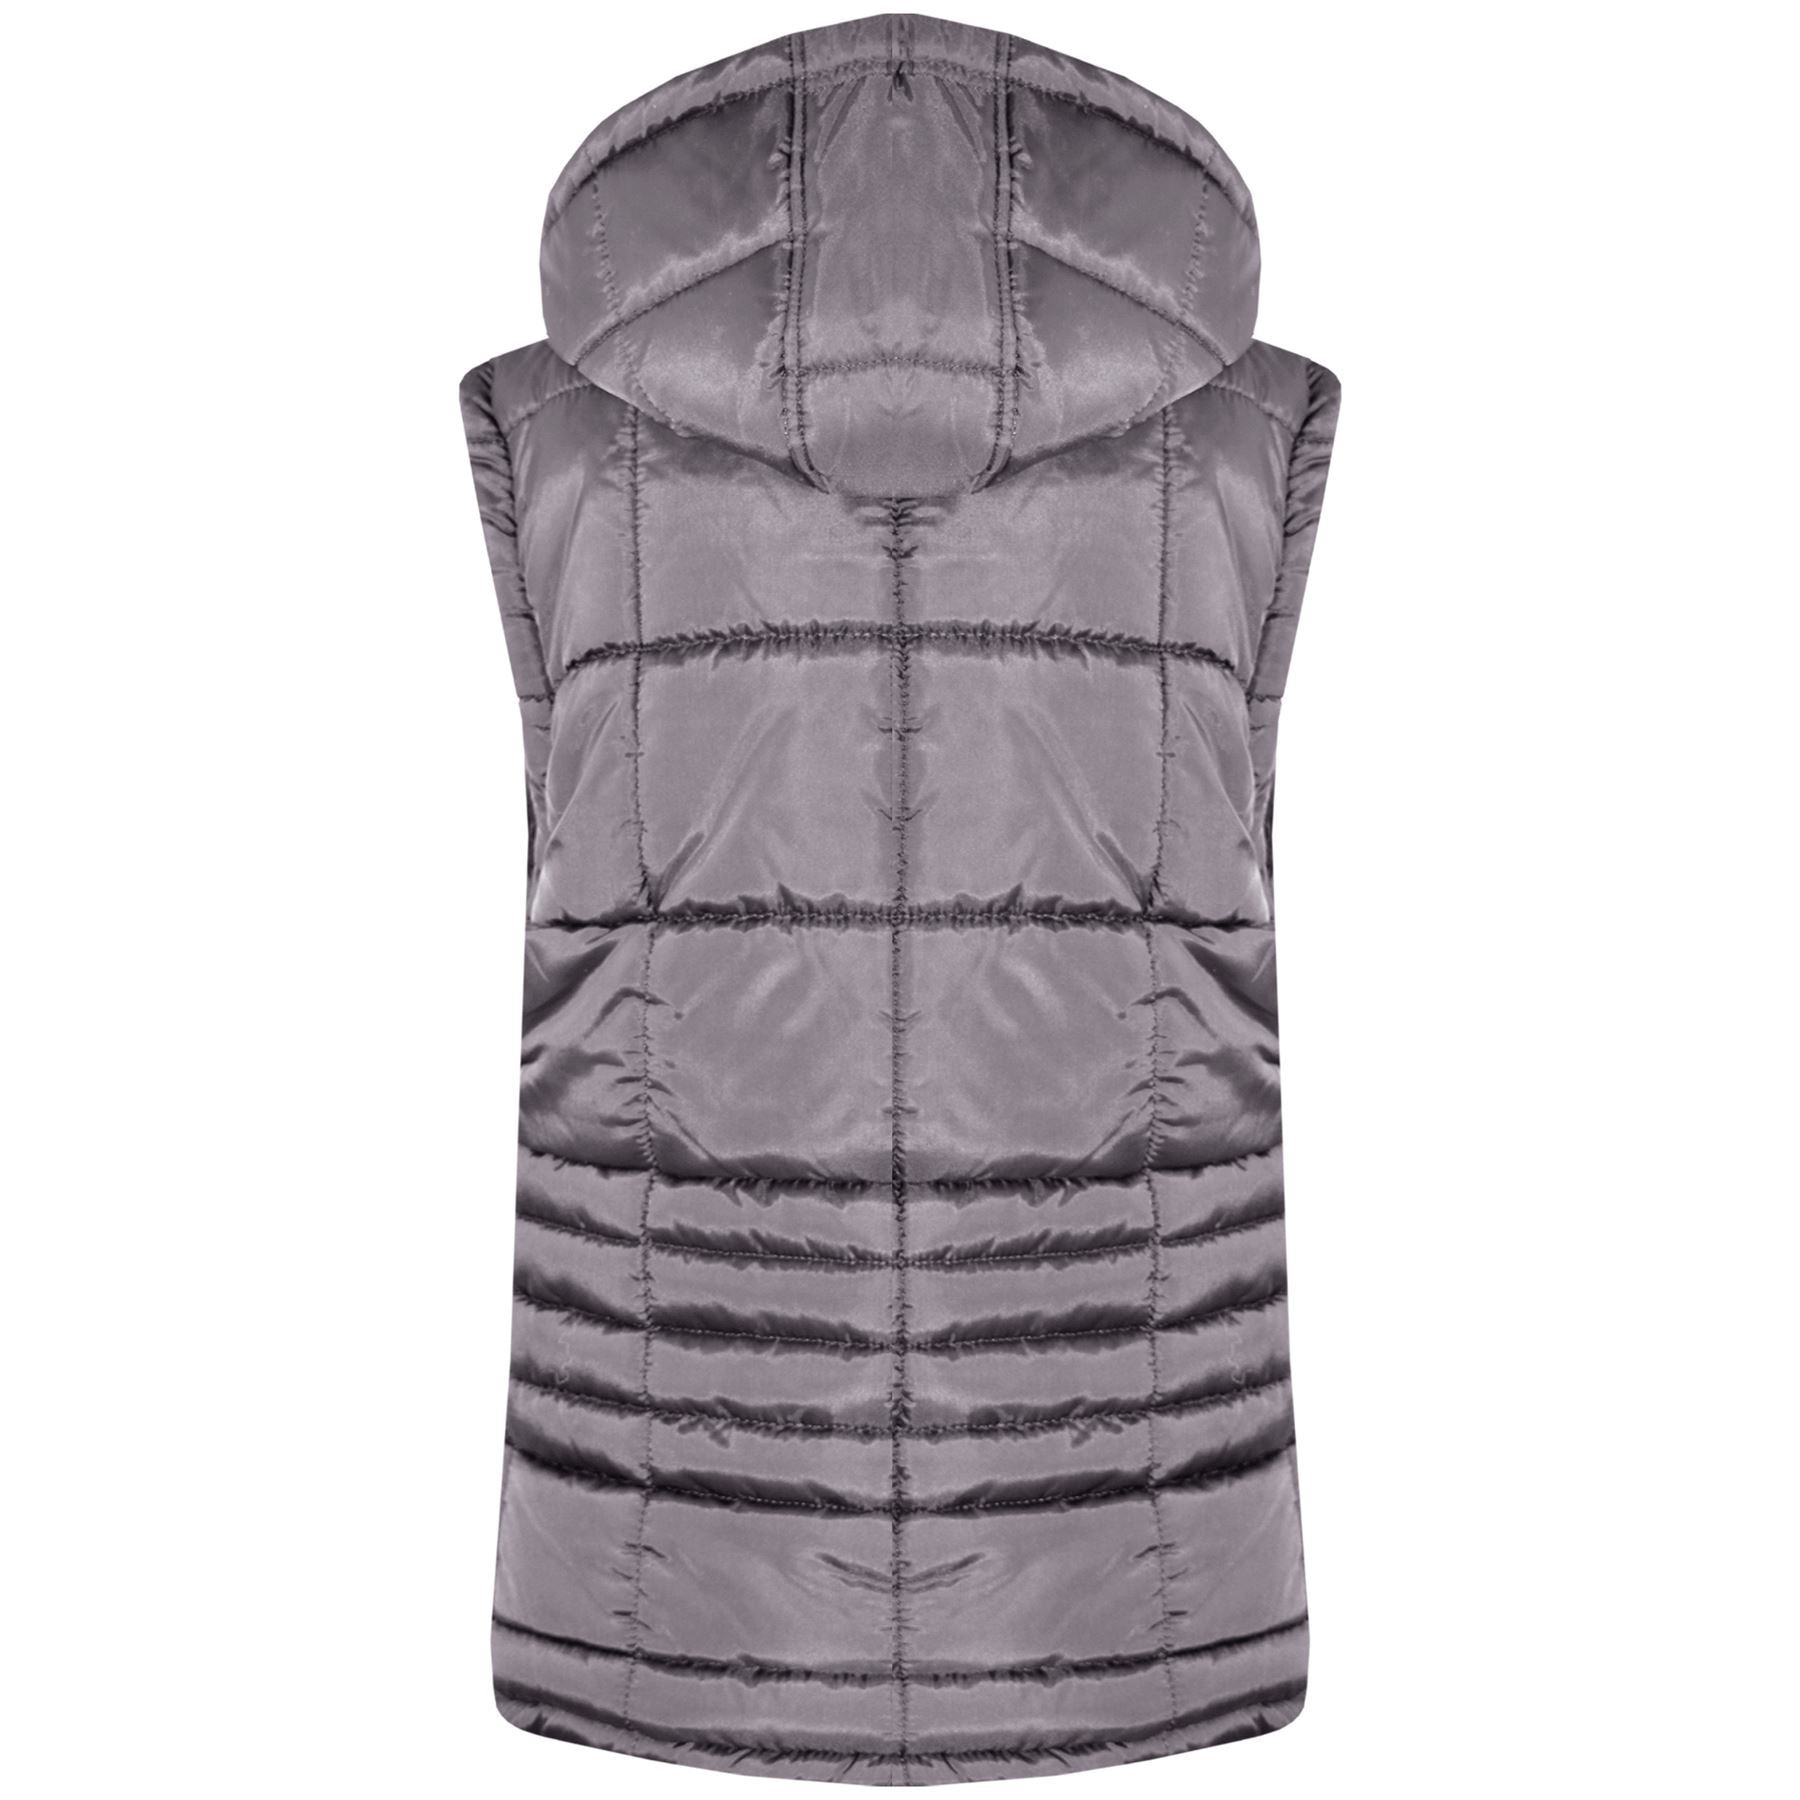 Kids Girls Boys Puffer Quilted Hooded Sleeveless Steel Grey Jacket